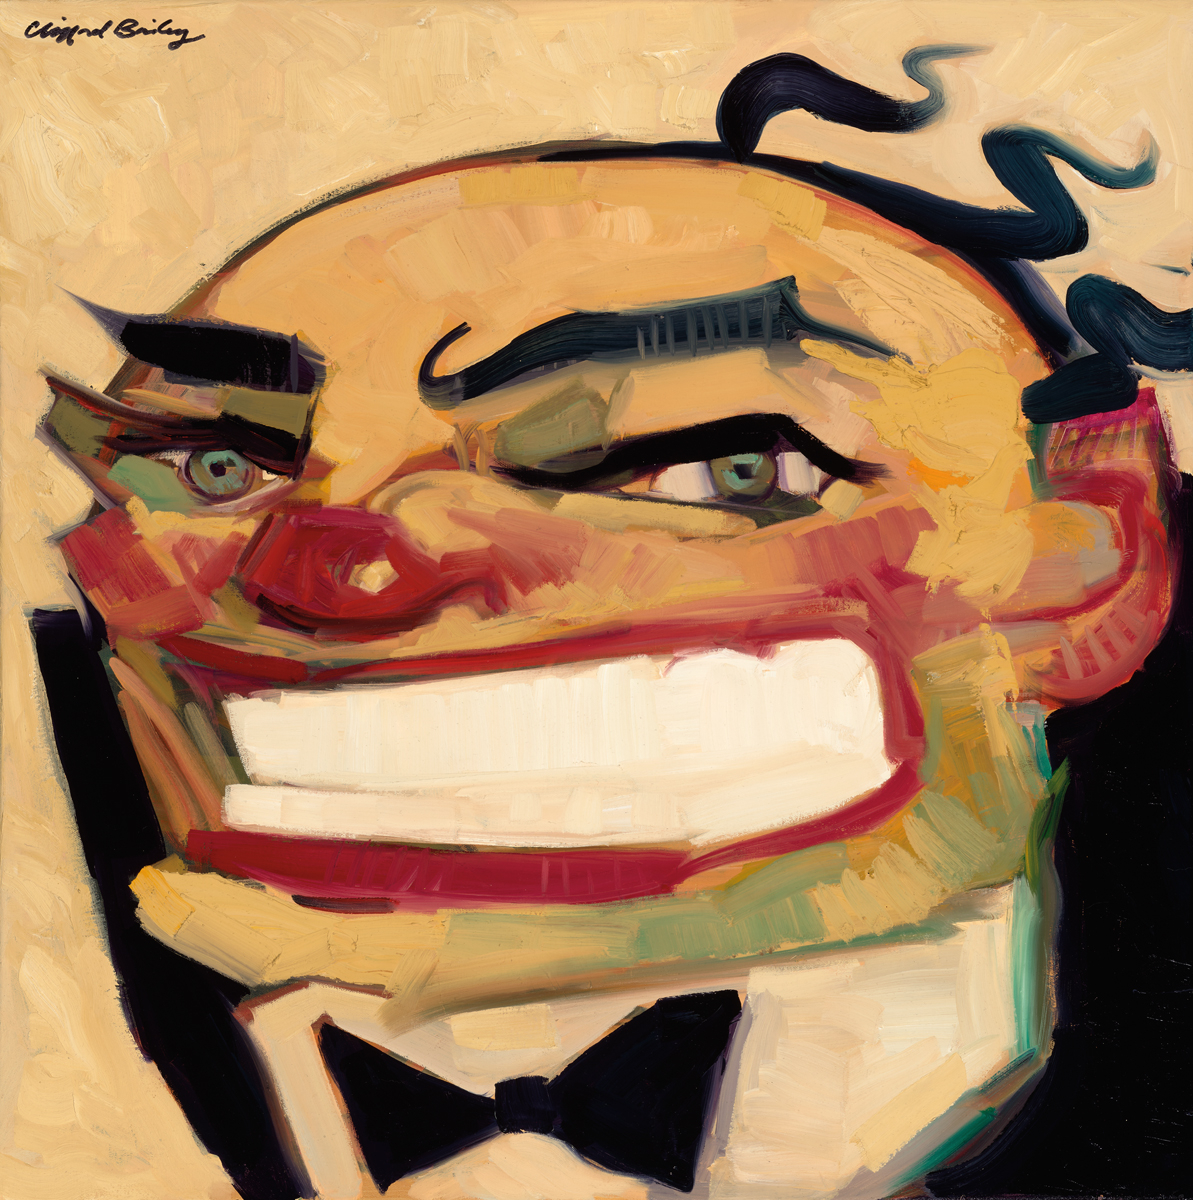 "Big Smile" by Clifford Bailey Artist